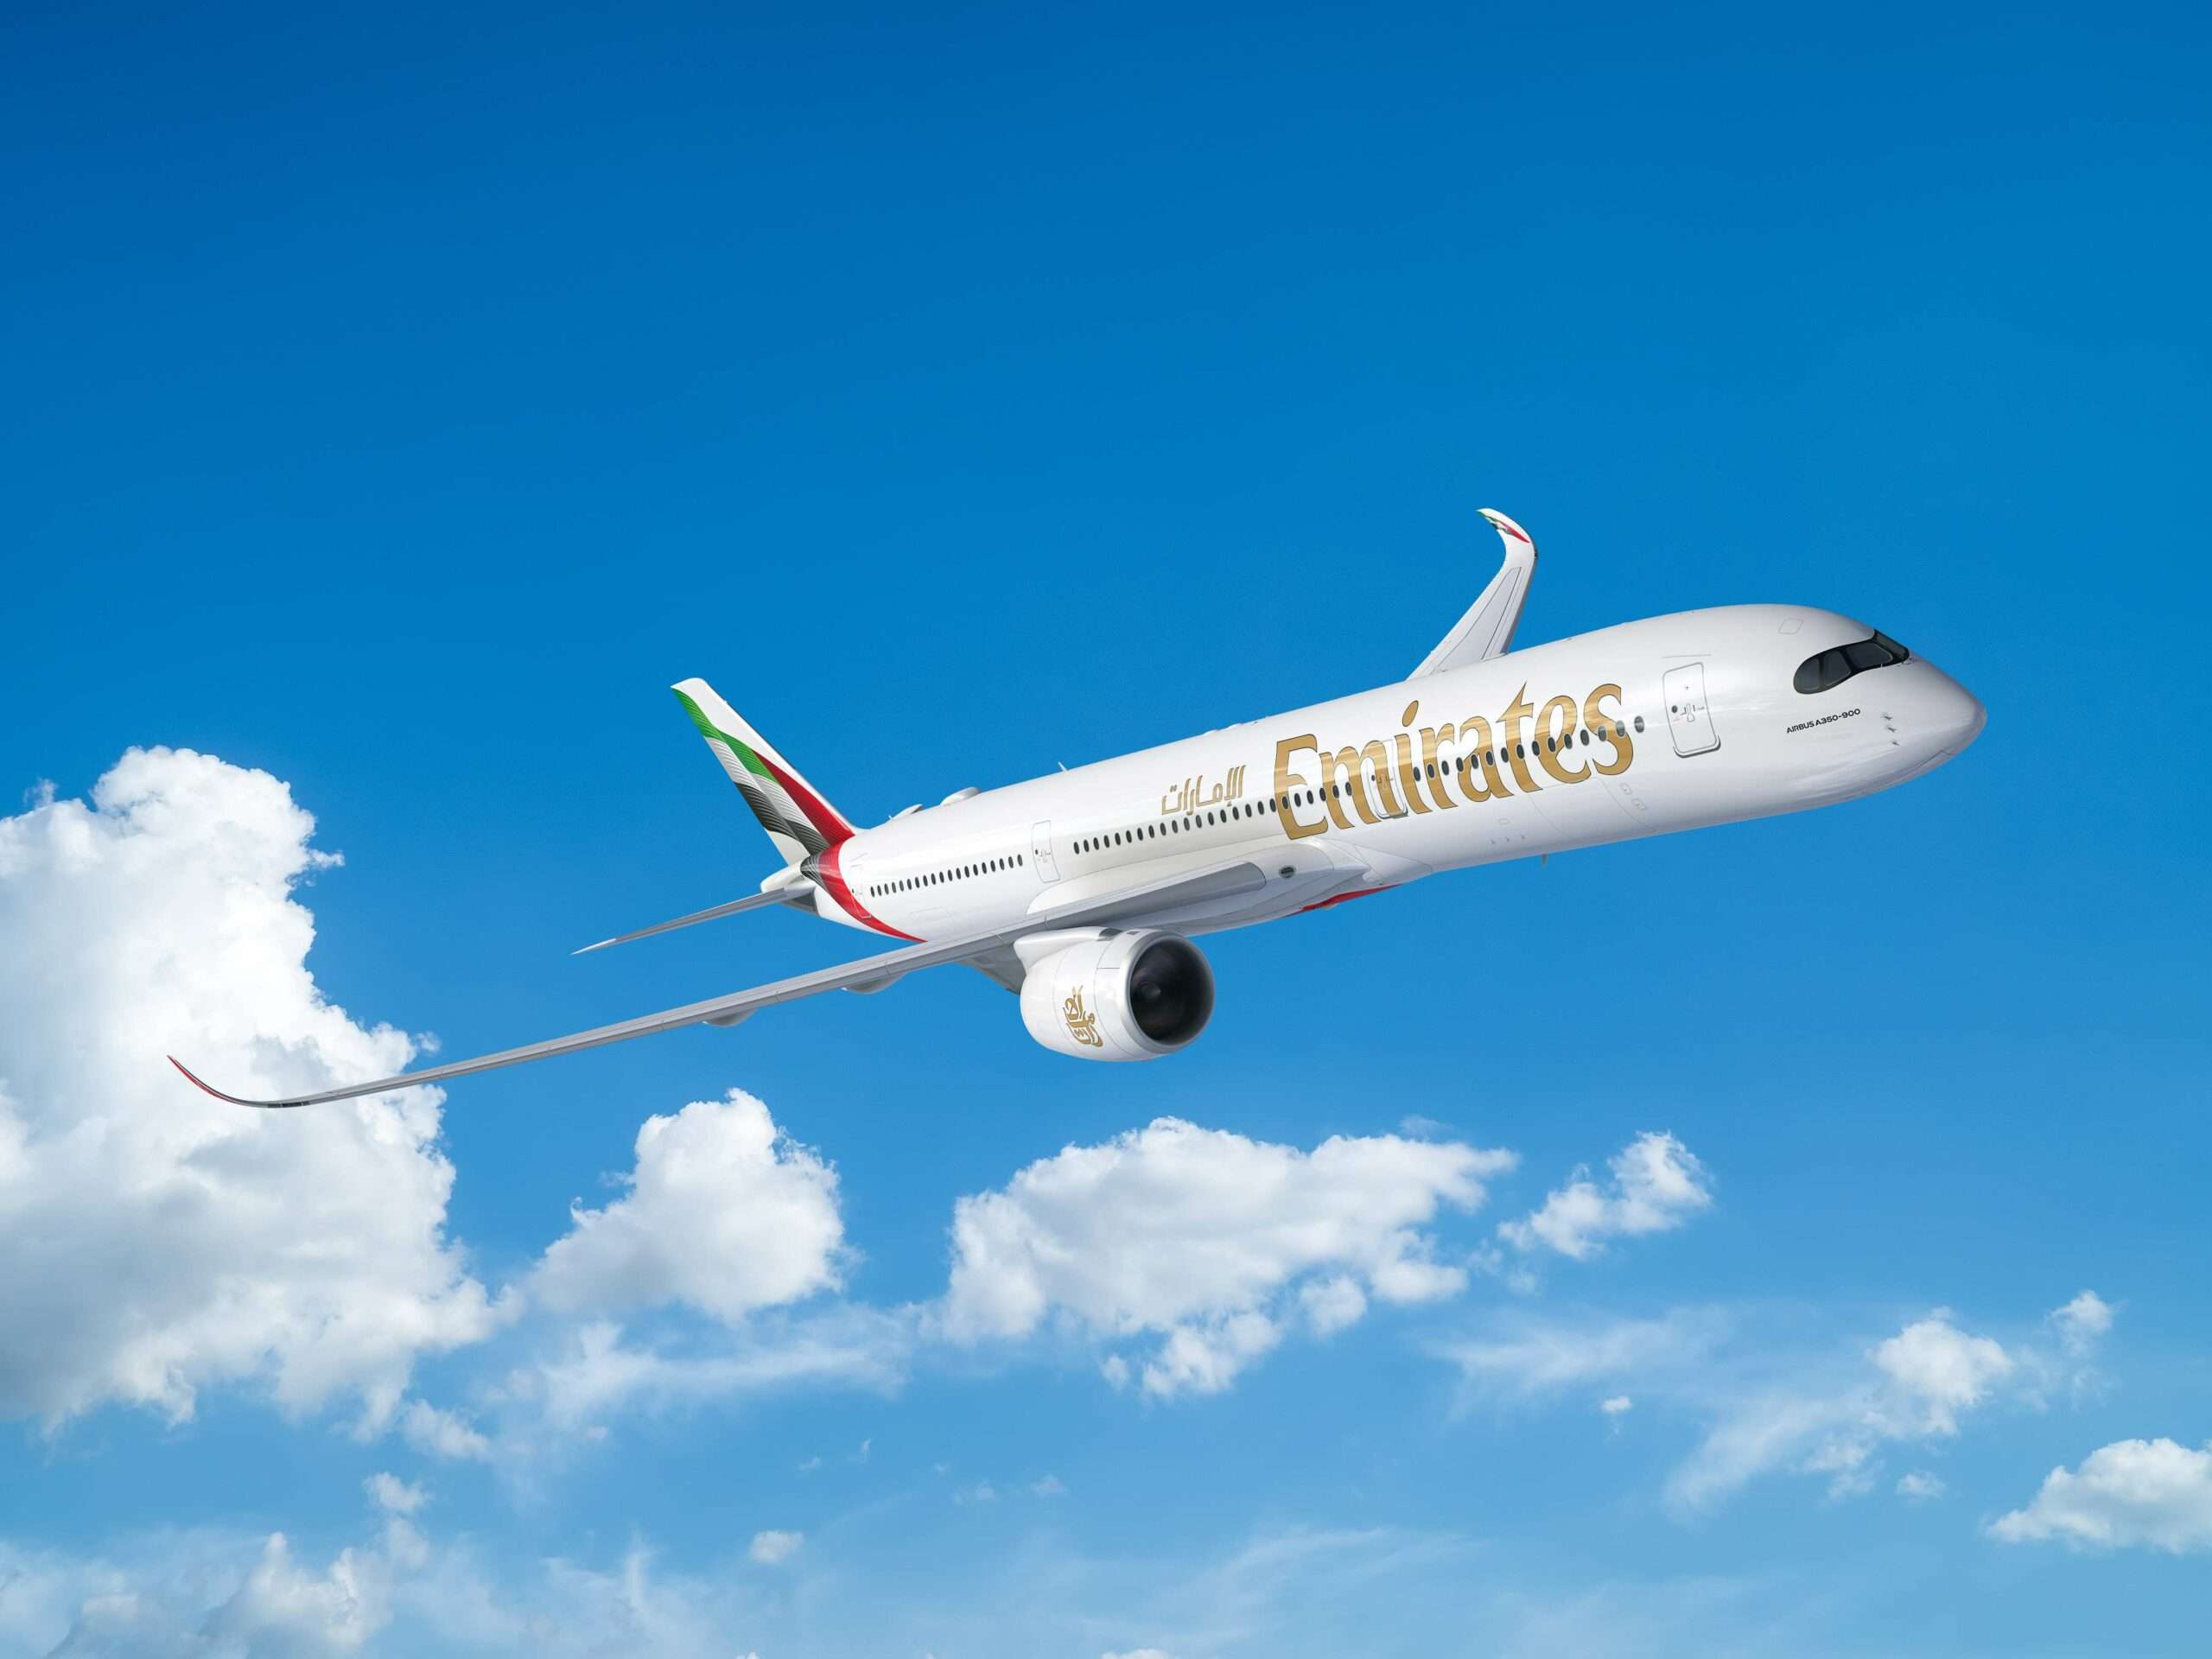 Airbus Achieves Consolation Order with Emirates, No -1000 Order